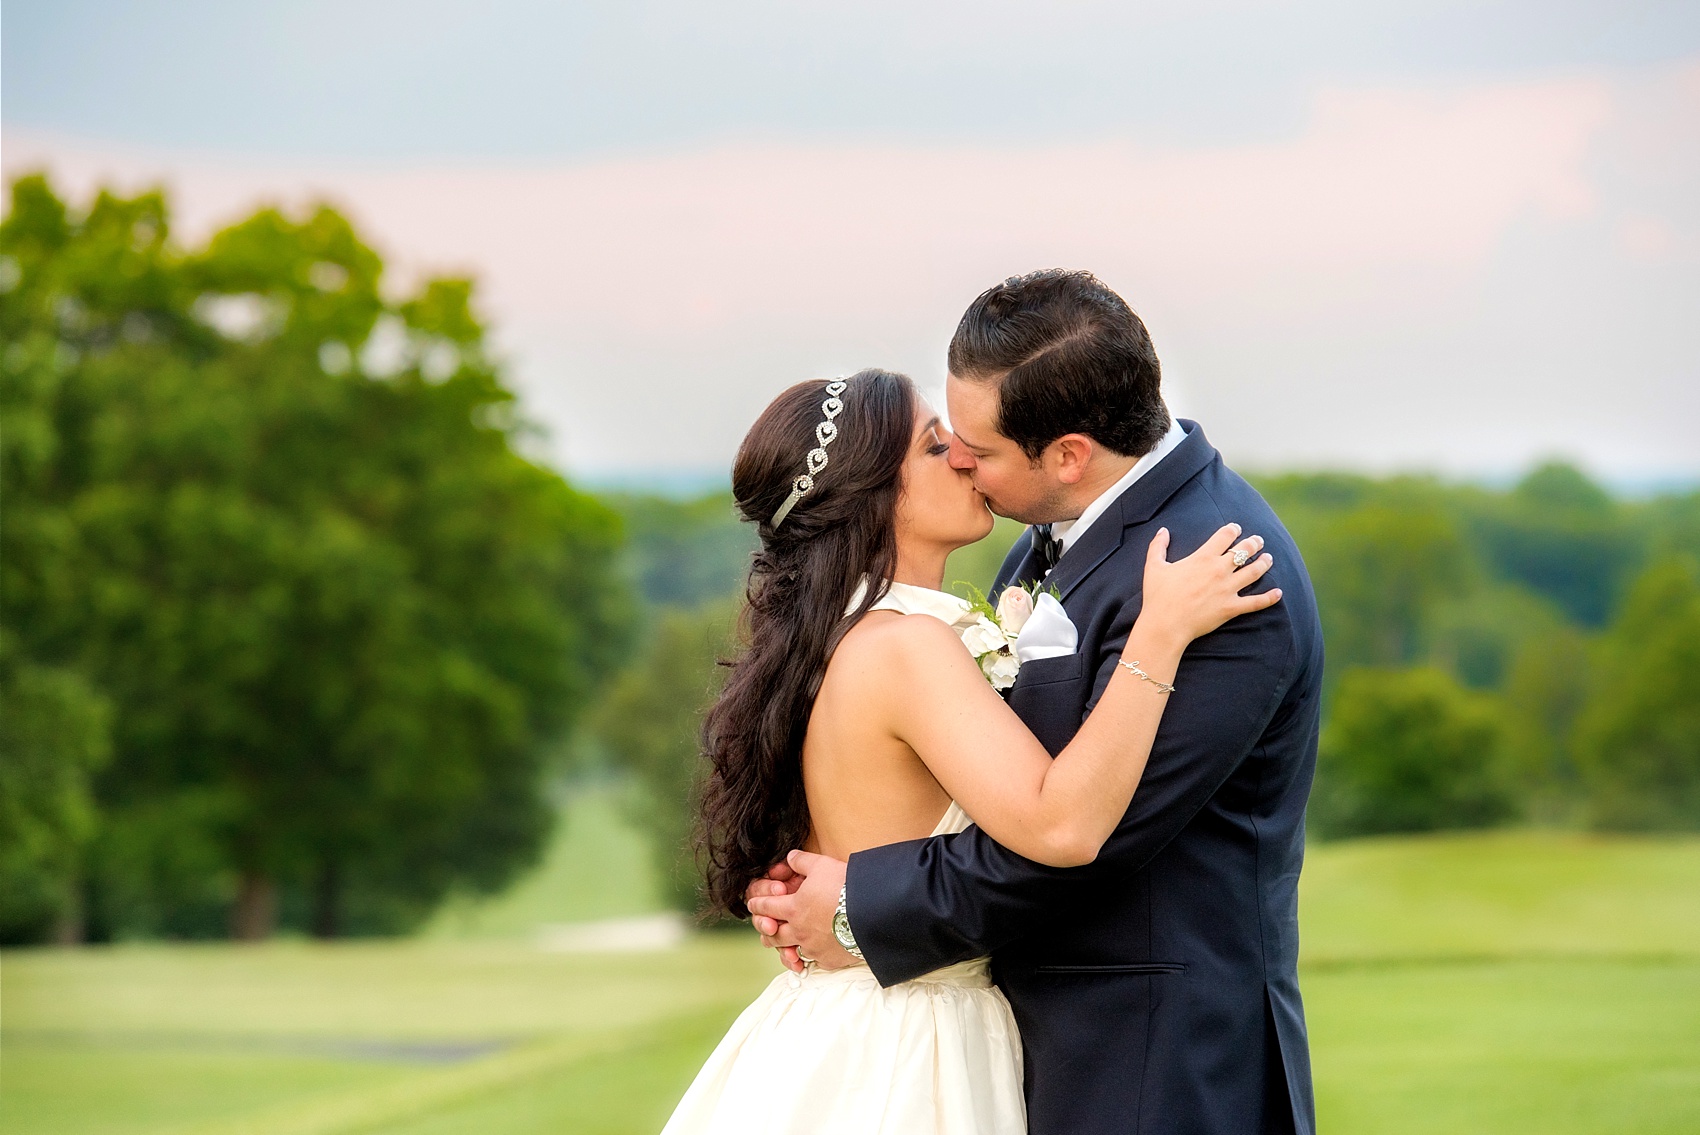 Mikkel Paige Photography photos from a wedding at Basking Ridge Country Club, NJ. The bride in a halter Amsale gown and groom in a navy blue suit kiss at a picturesque pink and blue sunset.